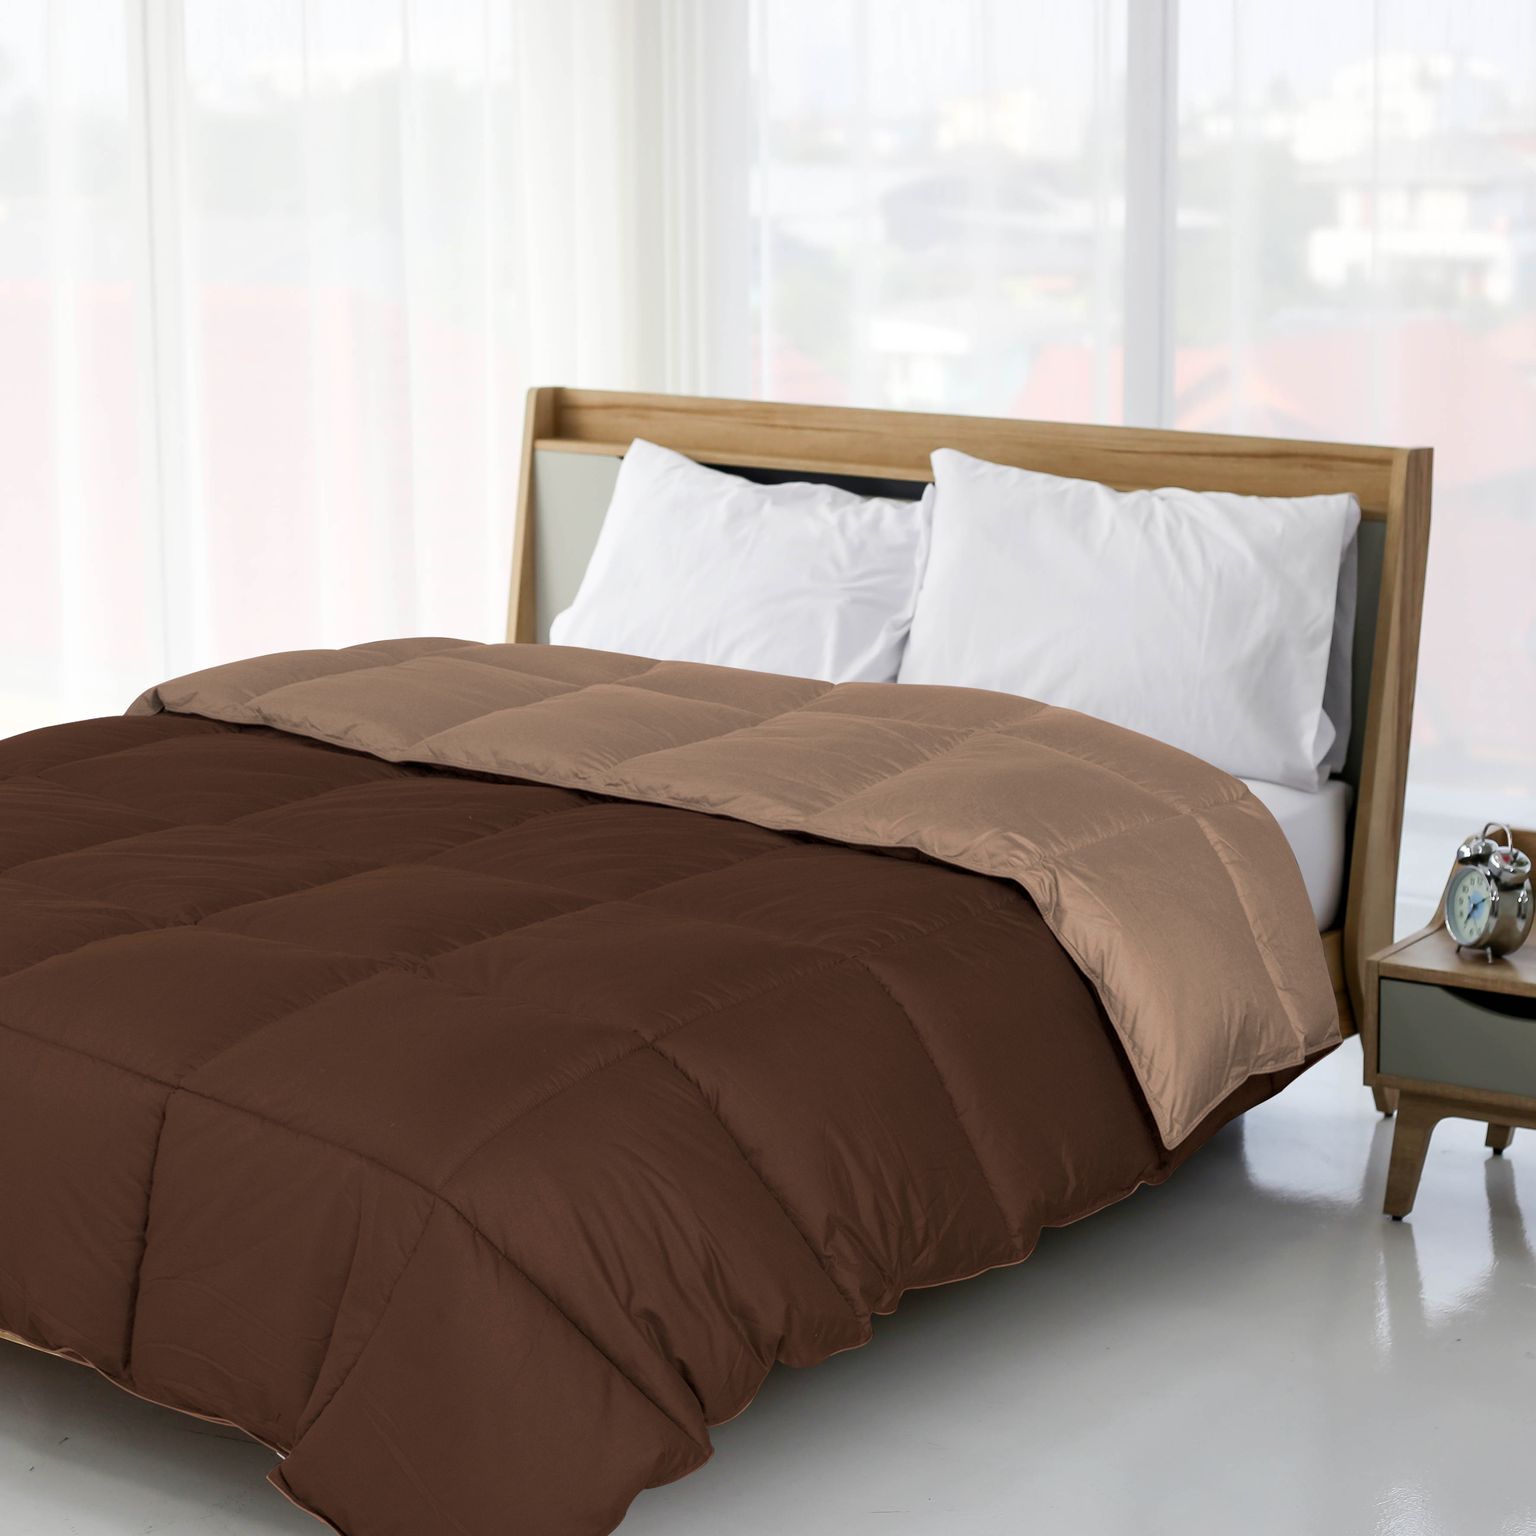 Superior Down Alternative Reversible Comforter, Full/ Queen, Taupe/ Choco - image 2 of 4